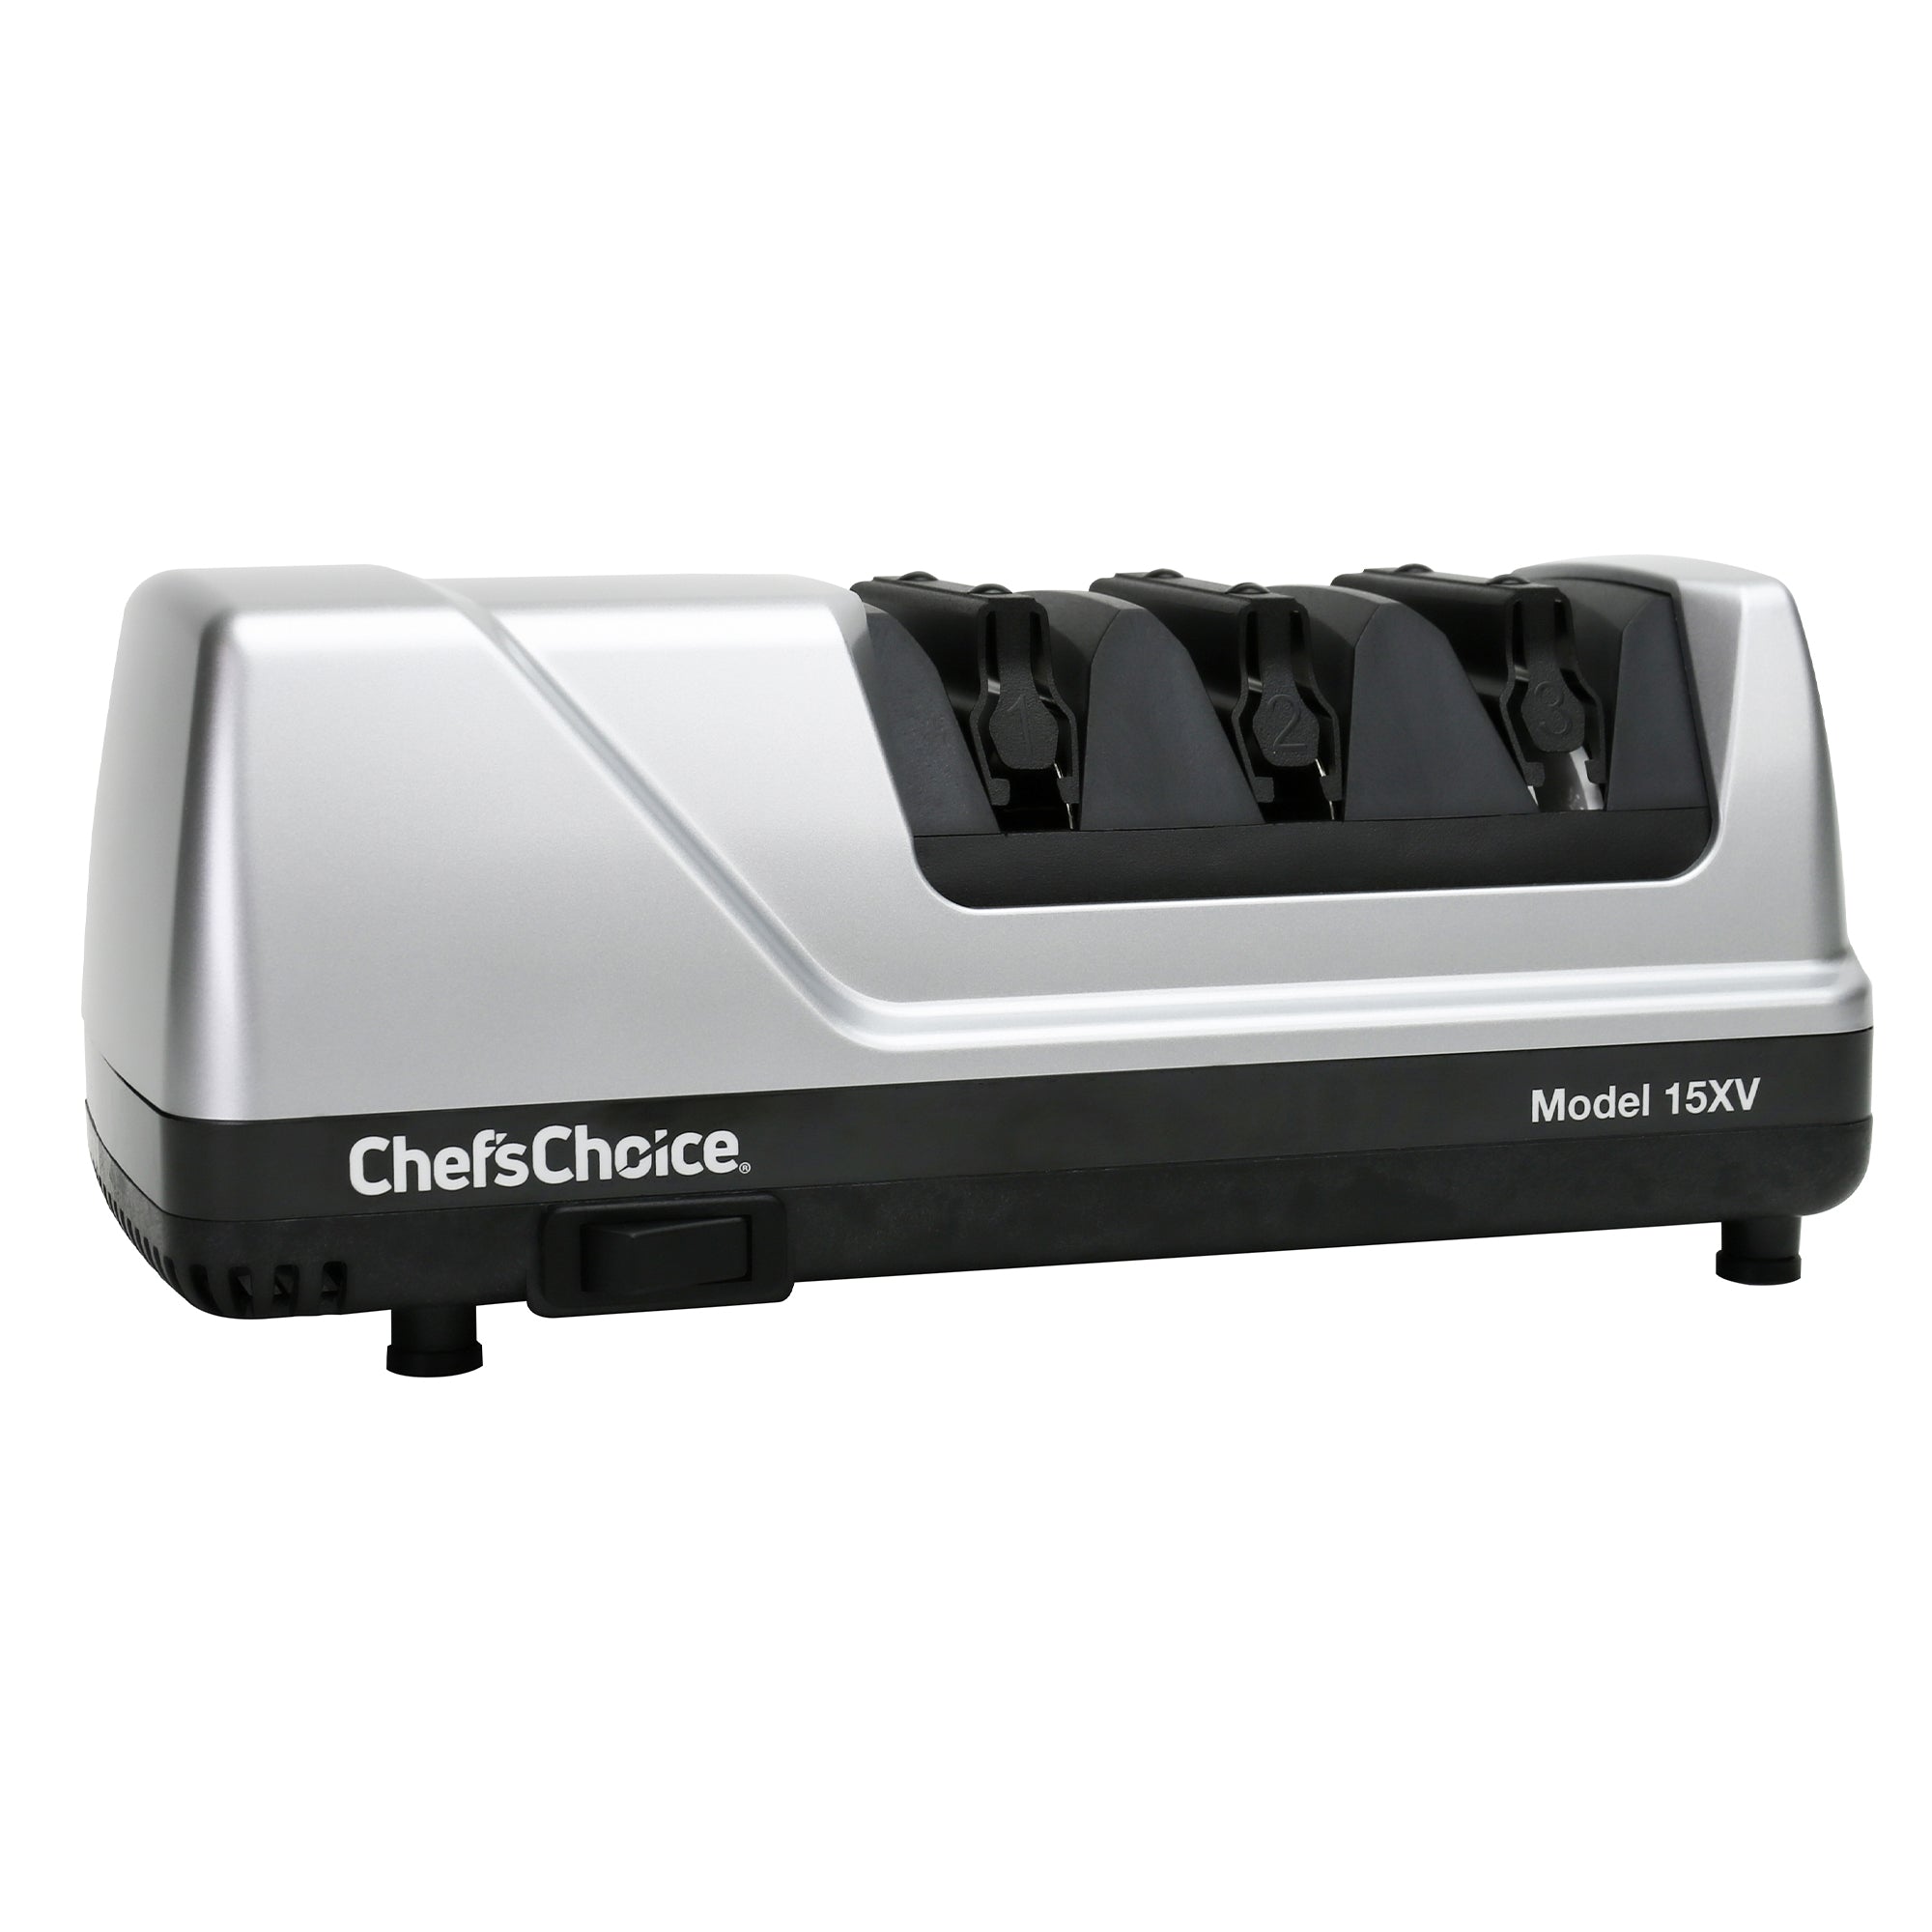 Chef'schoice Model 15xv Professional Electric Knife Sharpener, 3